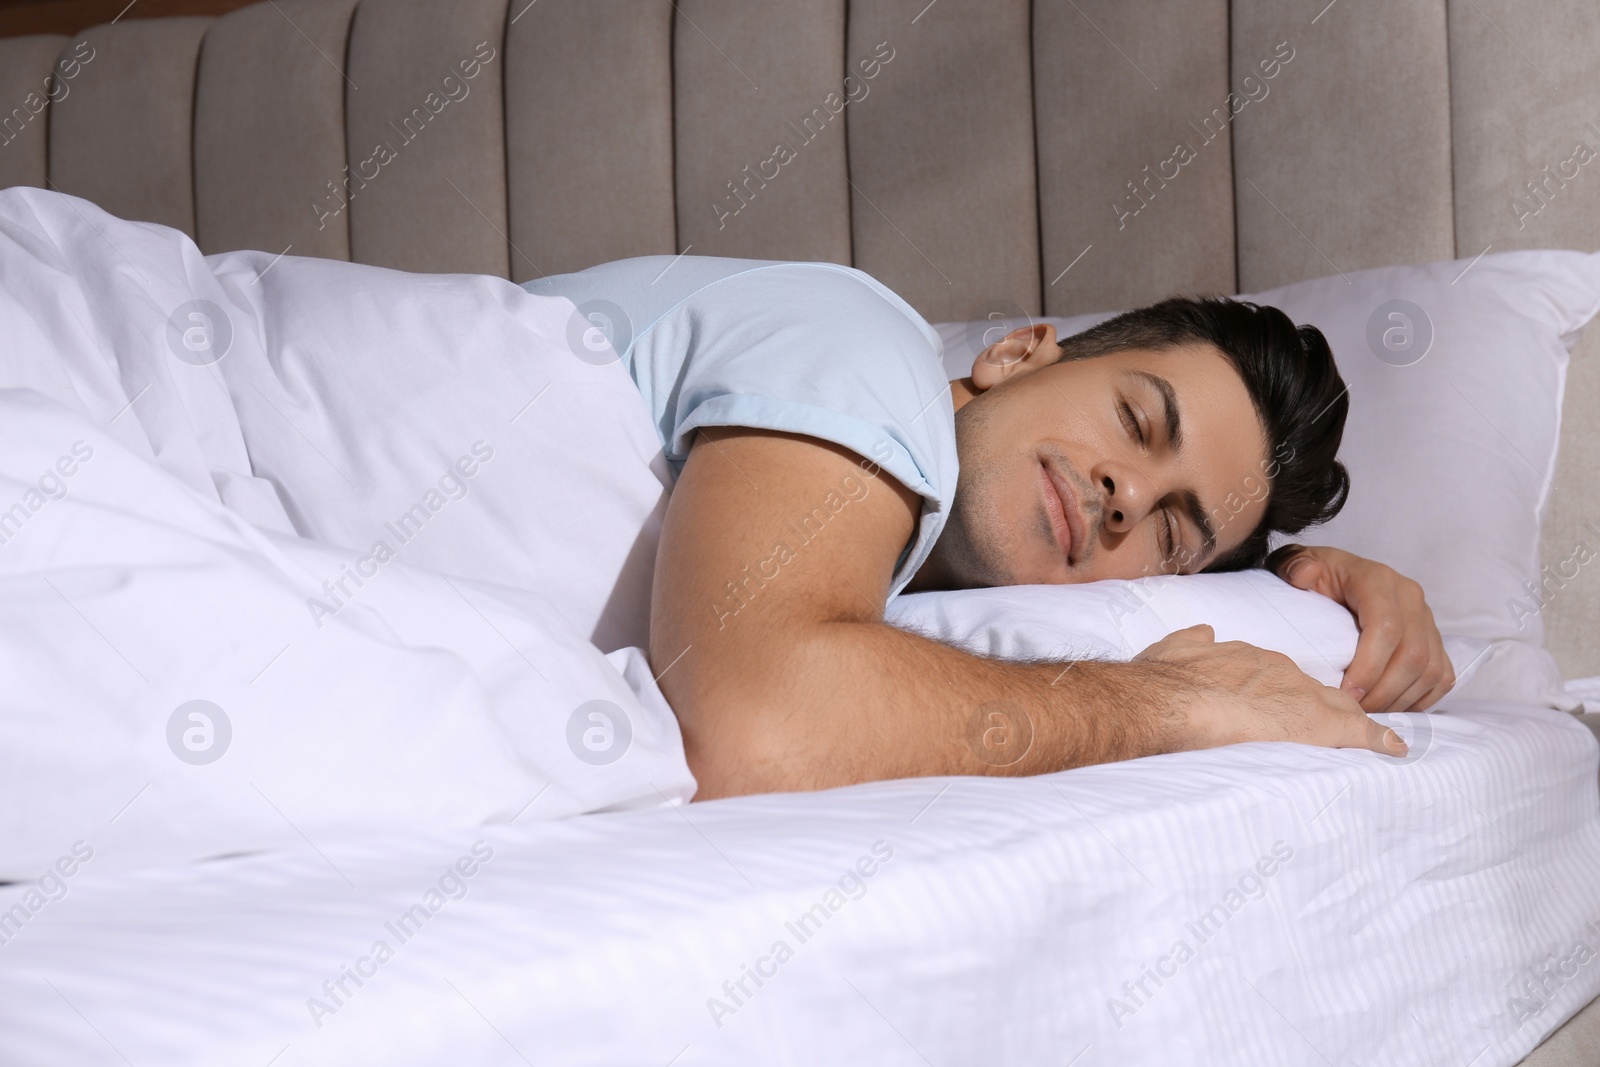 Photo of Man sleeping in comfortable bed with white linens